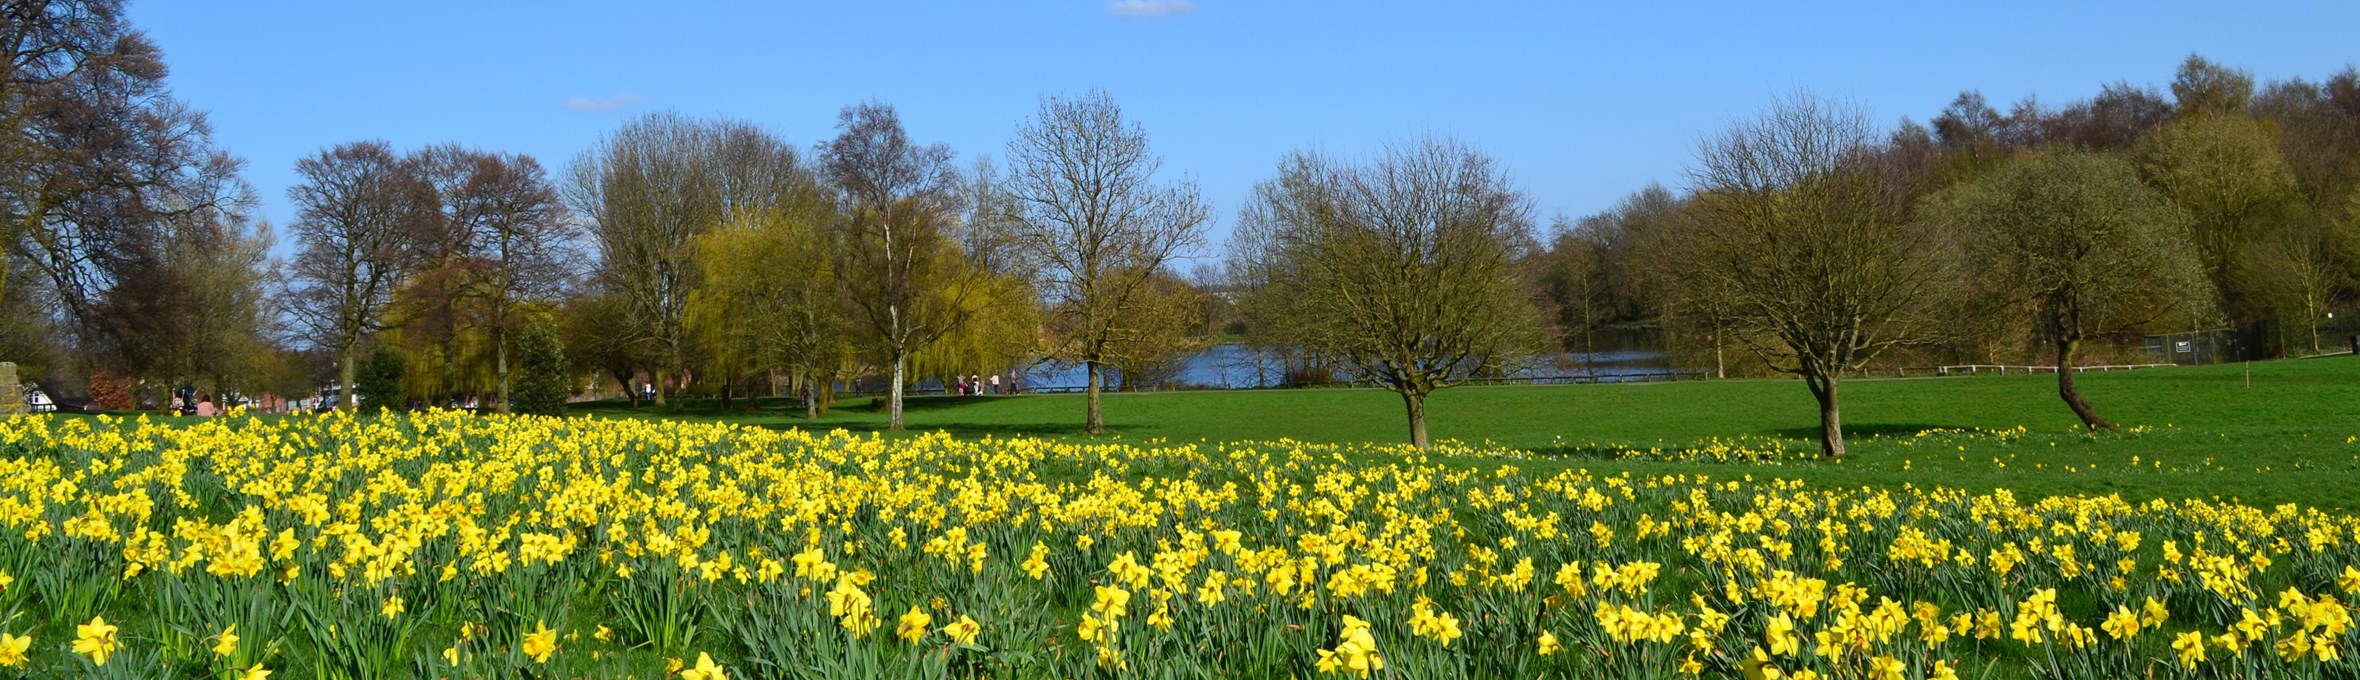 Daffodils, trees and blue sky with lake just showing in background